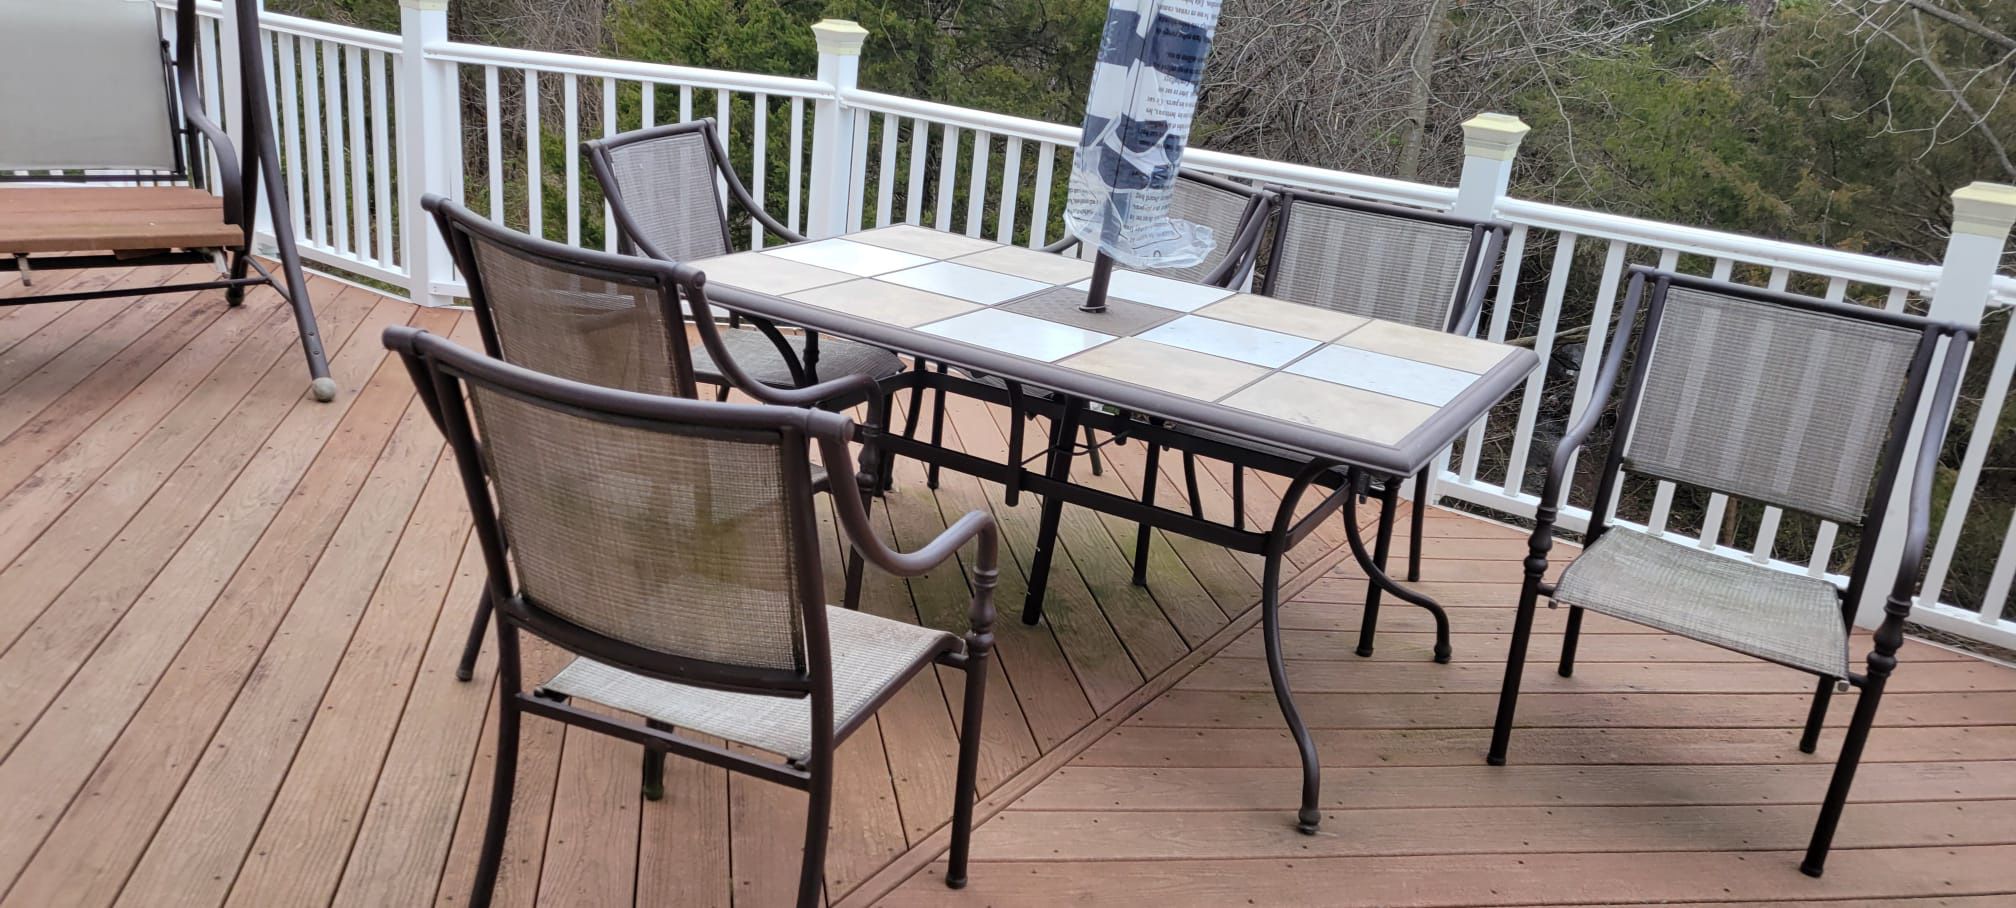 Outdoor Patio Dining Table And Chairs